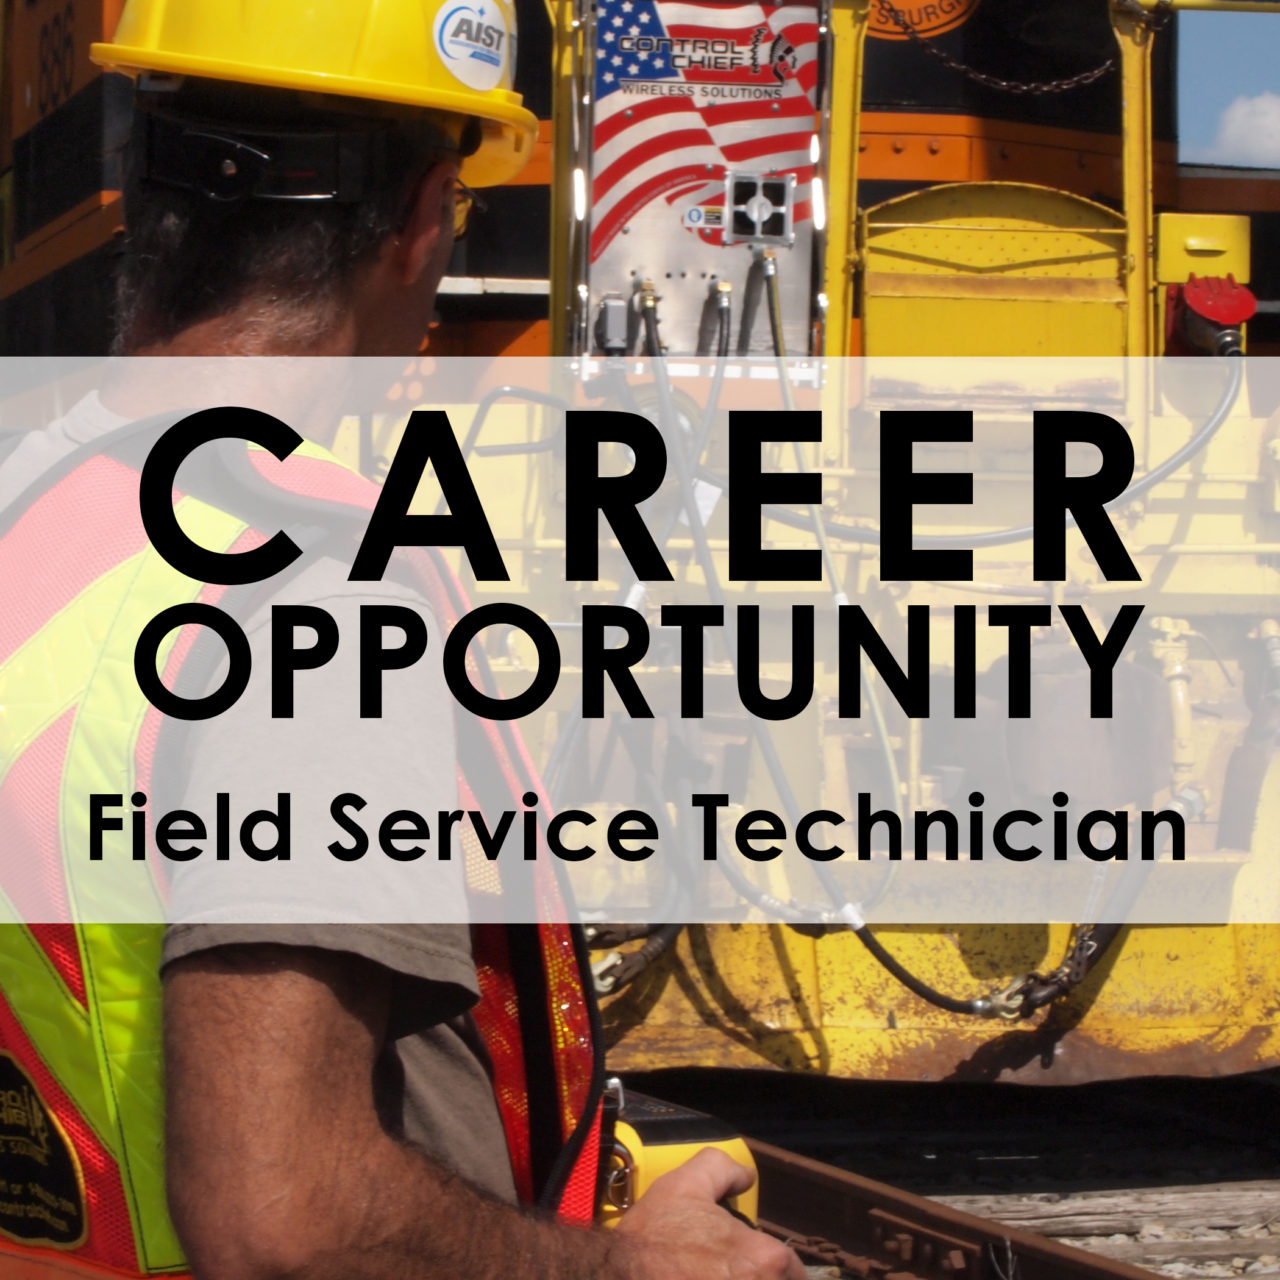 what is the role of field support technician in woodbridge township school district